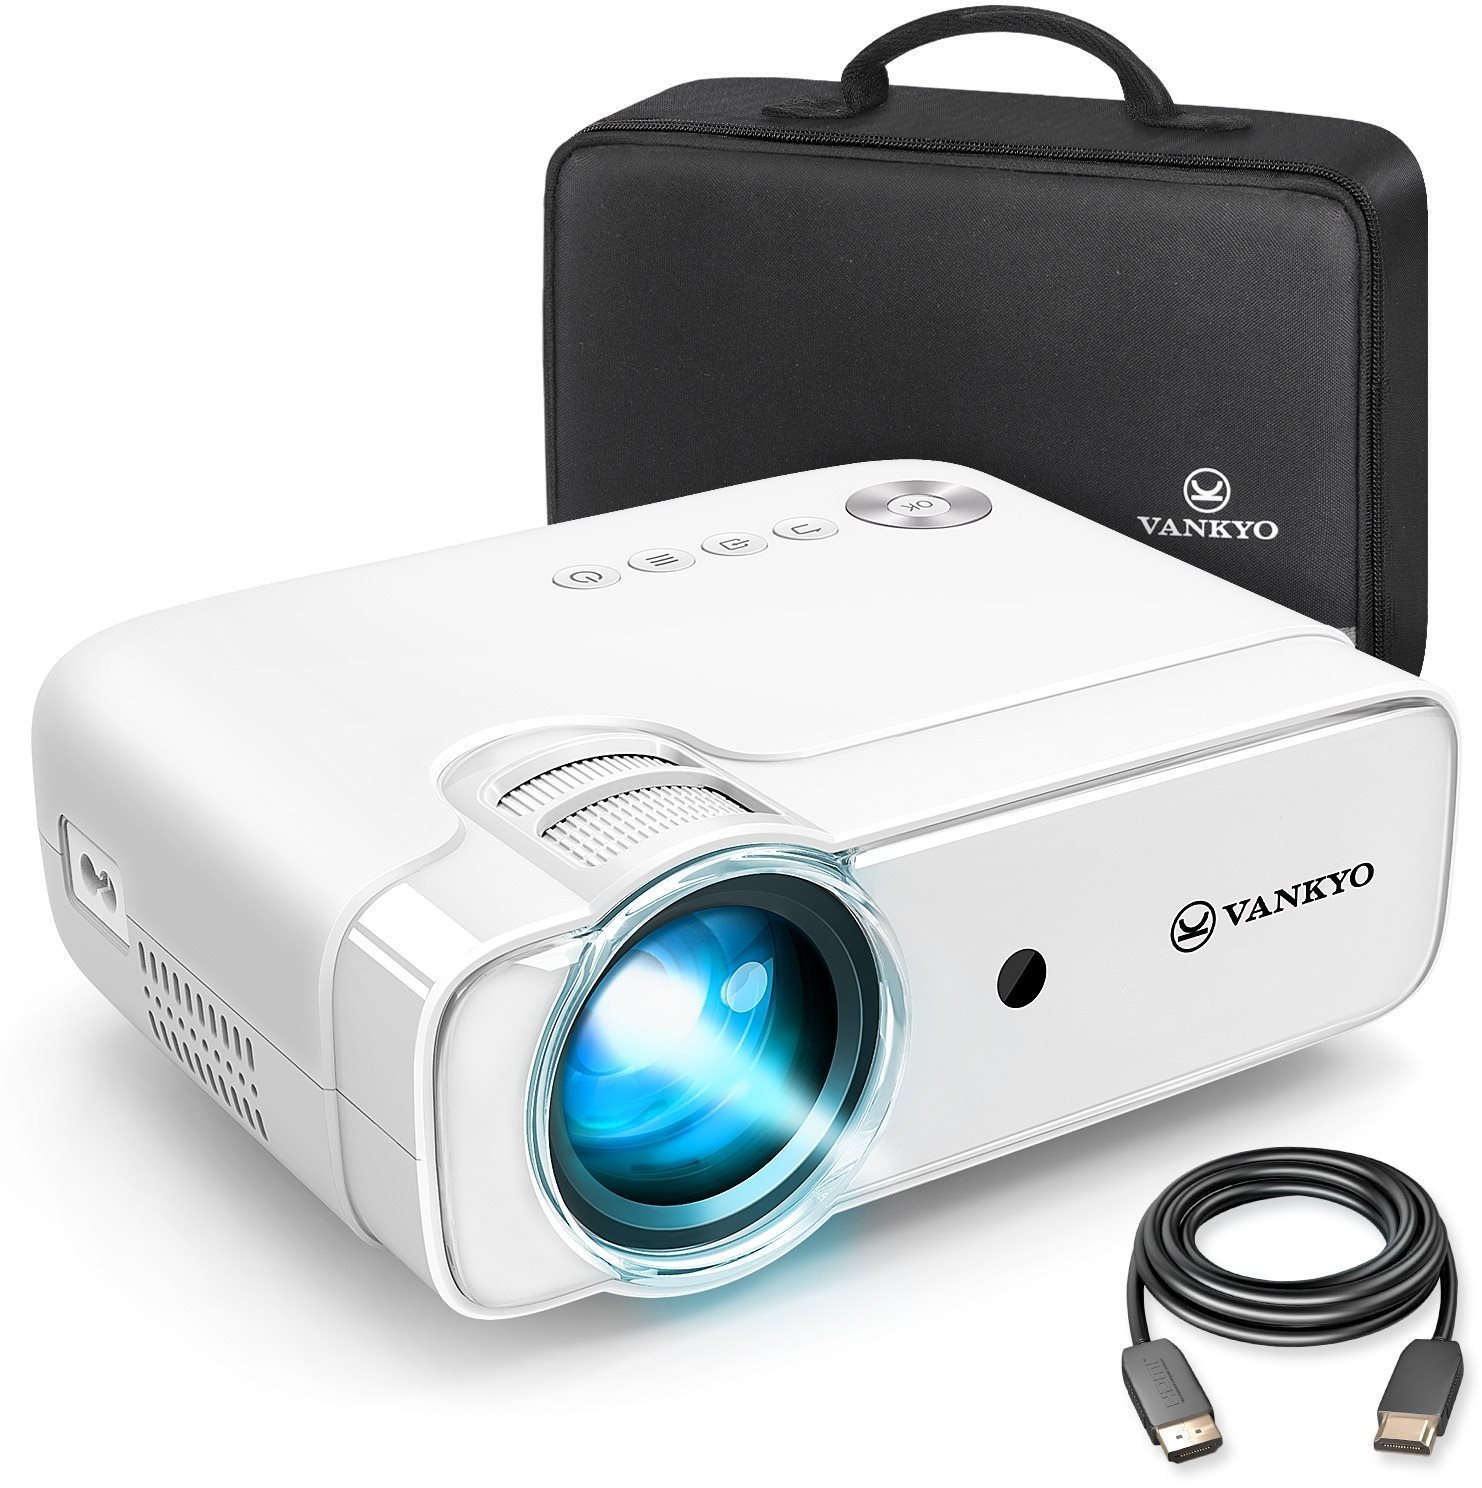 Projector VANKYO LEISURE 430WX Lateral view